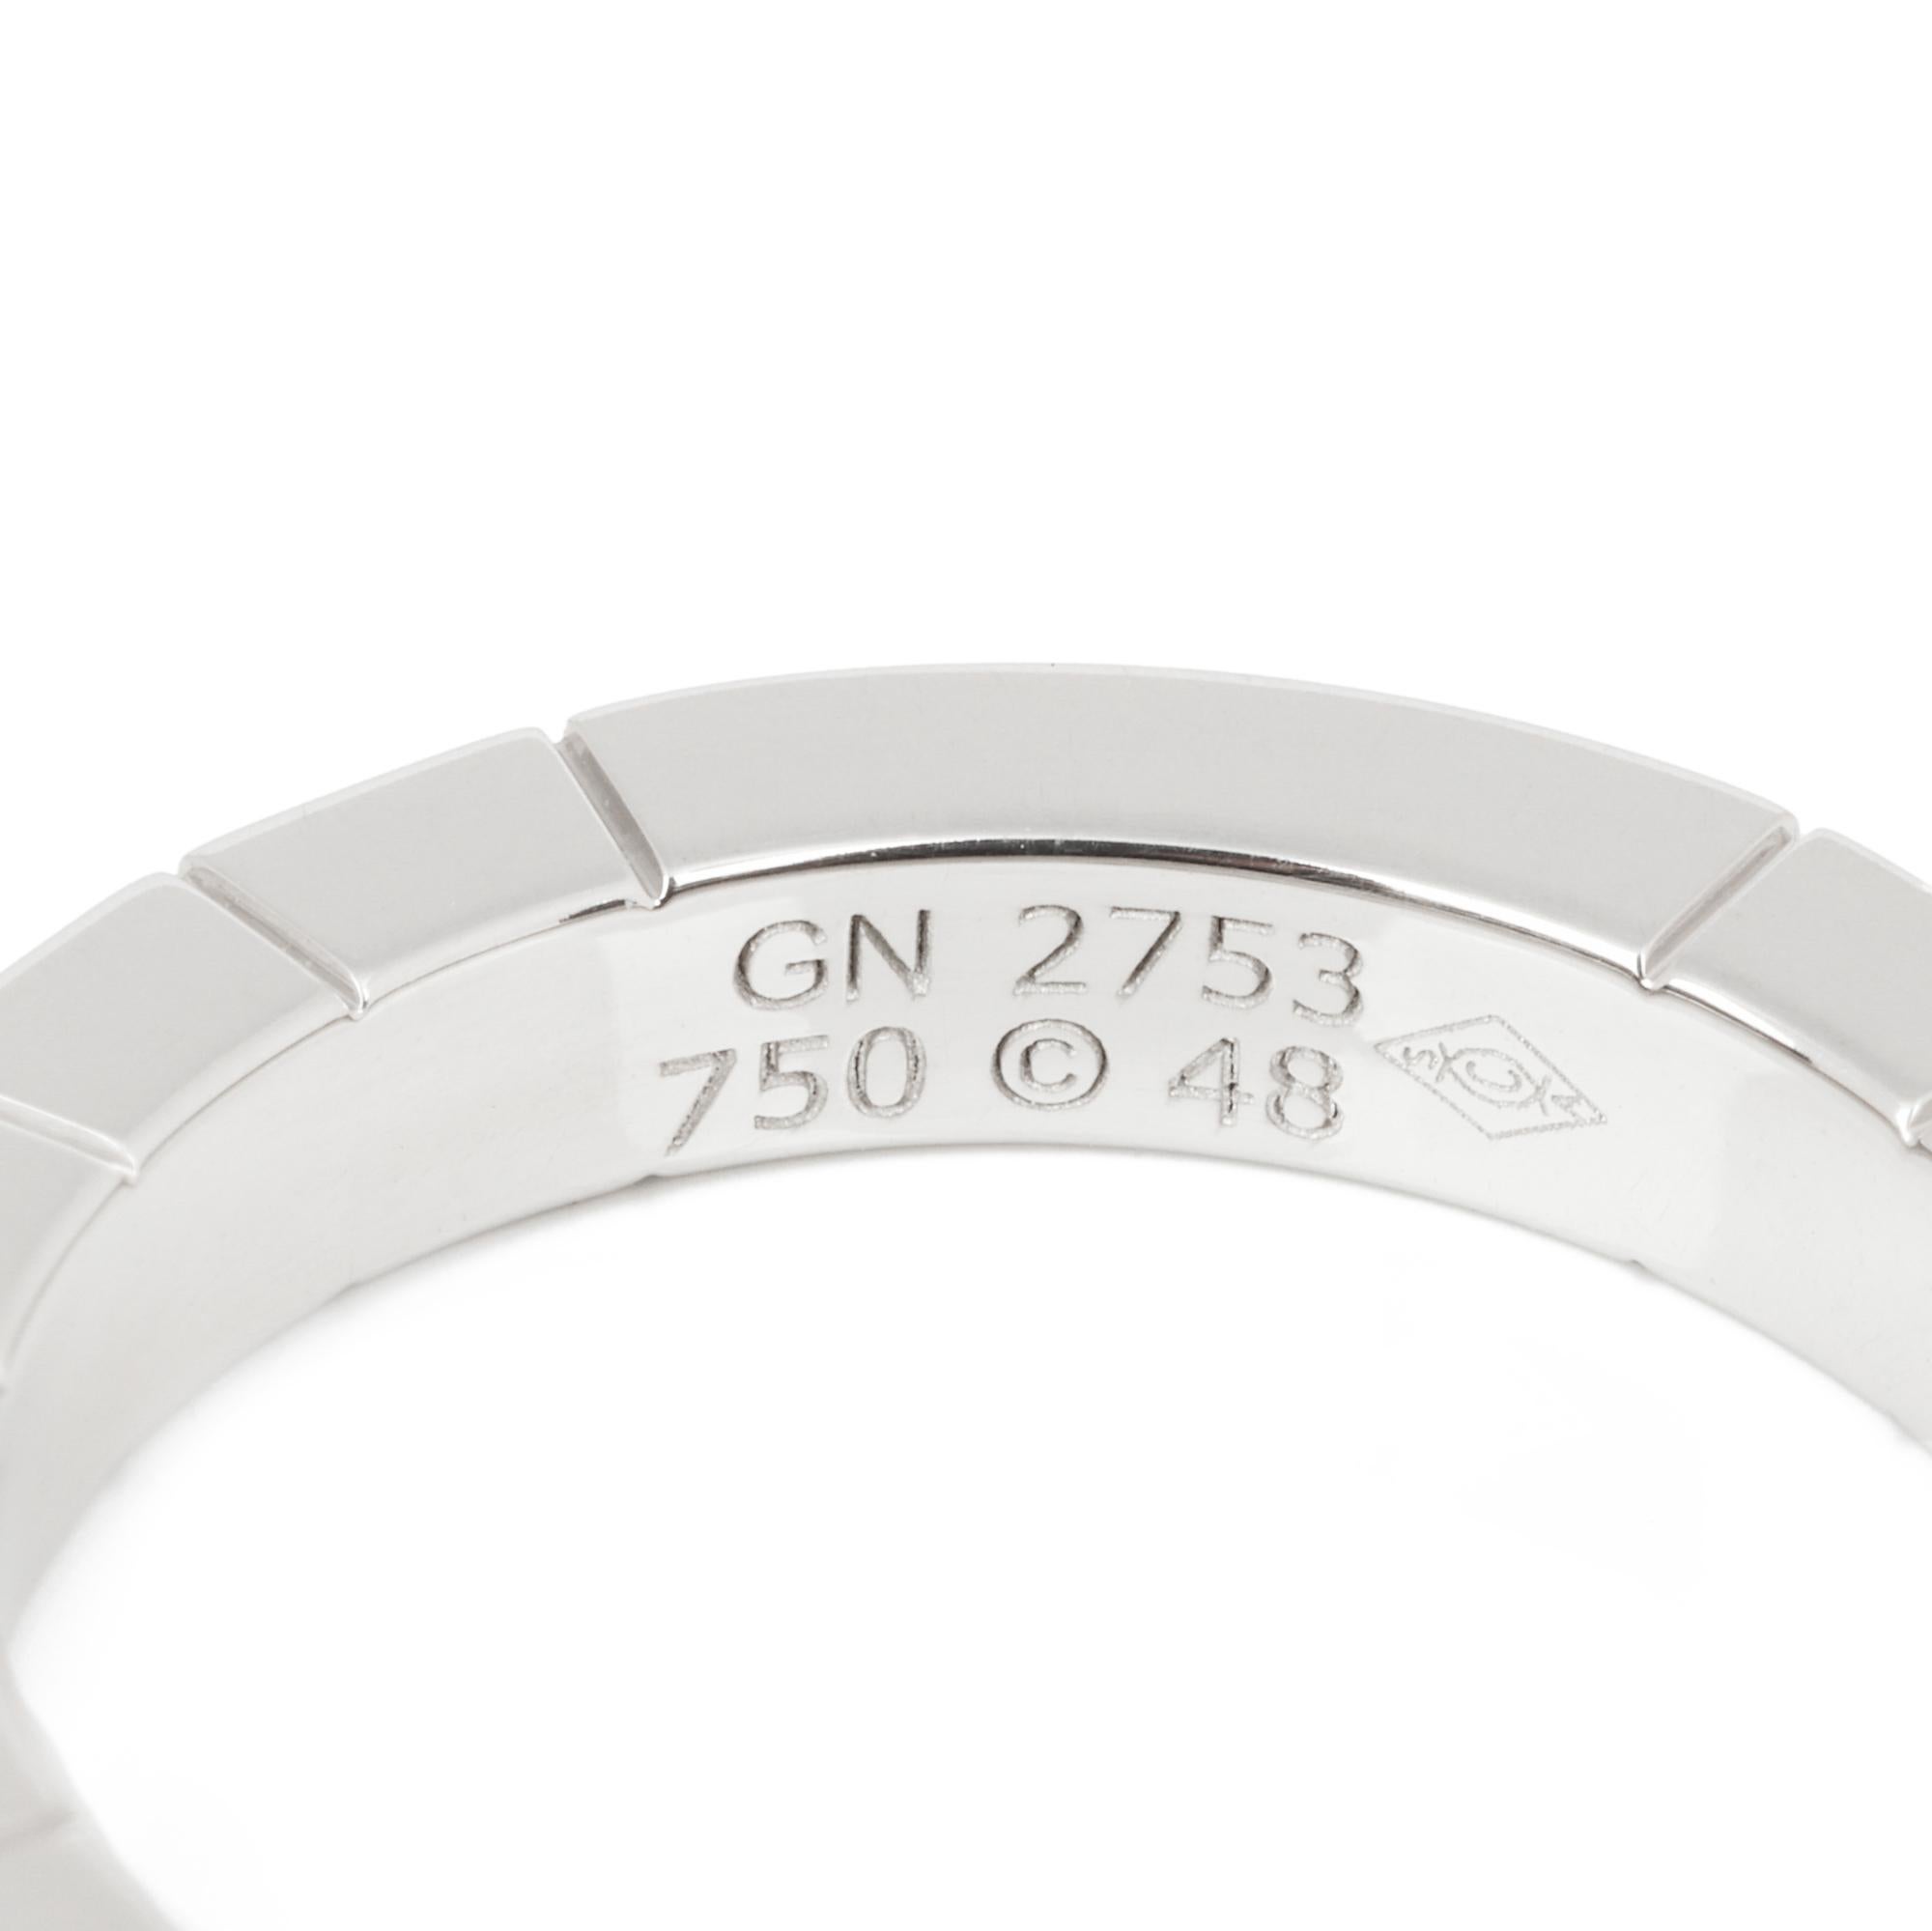 Cartier 18ct White Gold Lanieres Band Ring

Brand Cartier
Model Lanieres Band Ring
Product Type Ring
Serial Number GN****
Material(s) 18ct White Gold
UK Ring Size I 1/2
EU Ring Size 48
US Ring Size 4 1/2
Resizing Possible No
Band Width 3mm
Total